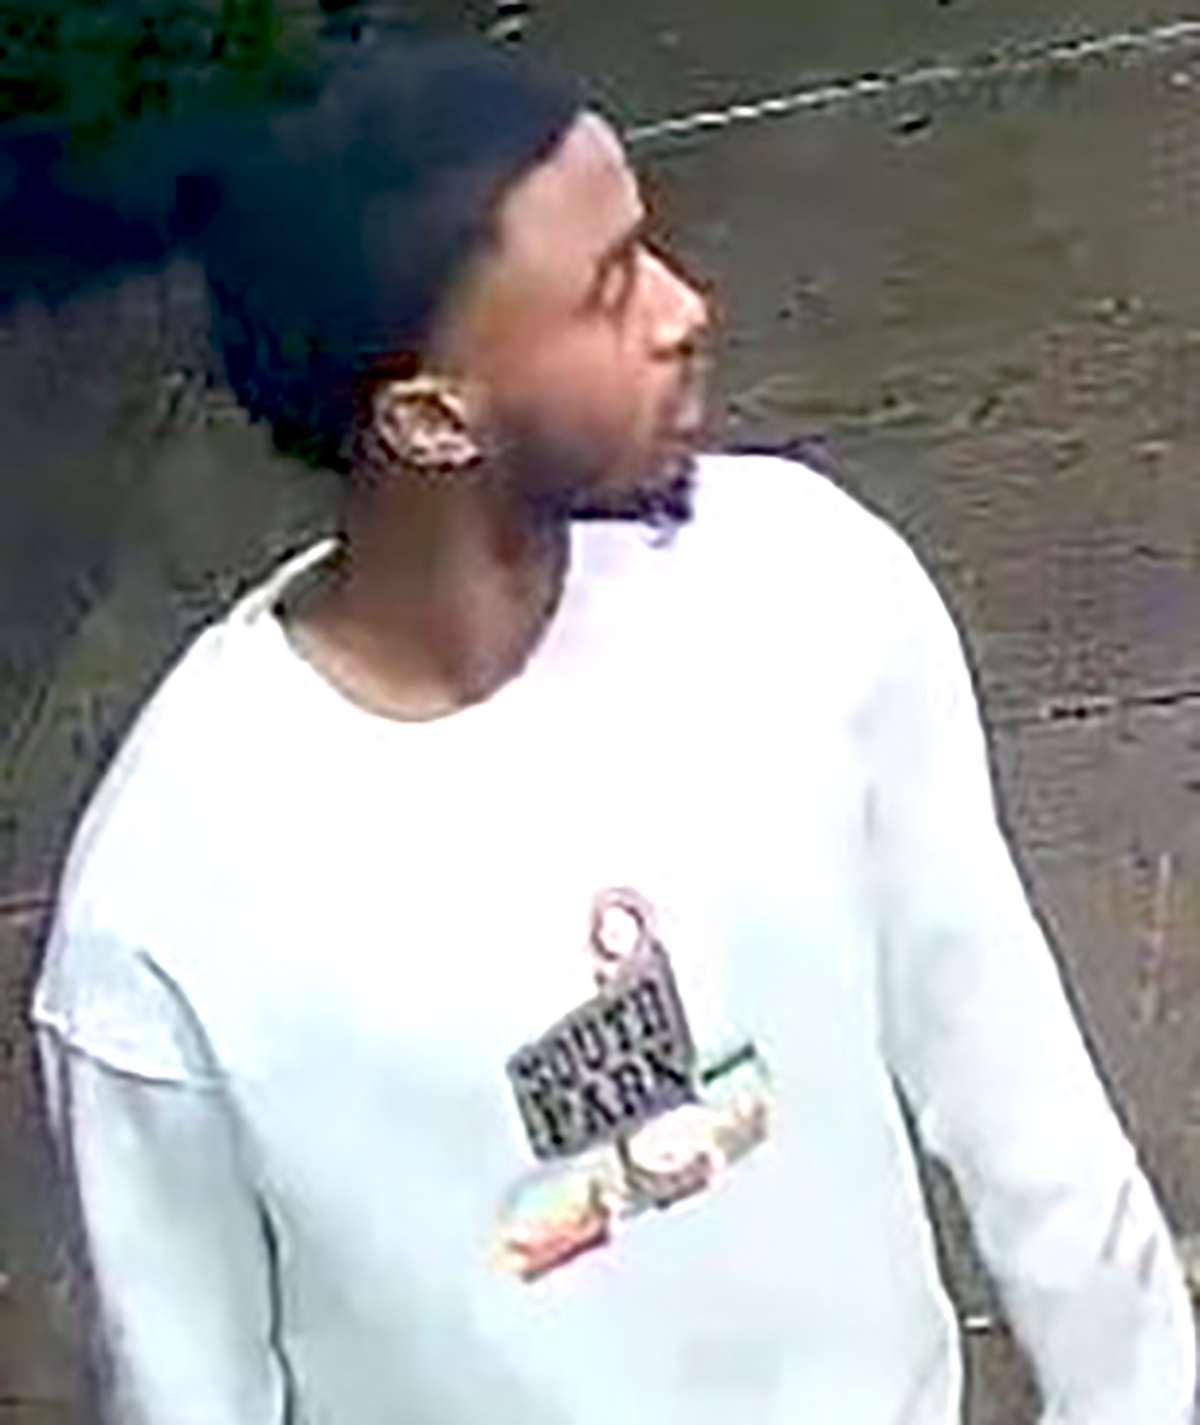 The NYPD is searching for a man dressed in a "South Park" sweatshirt in connection with a shooting inside a Queens restaurant.